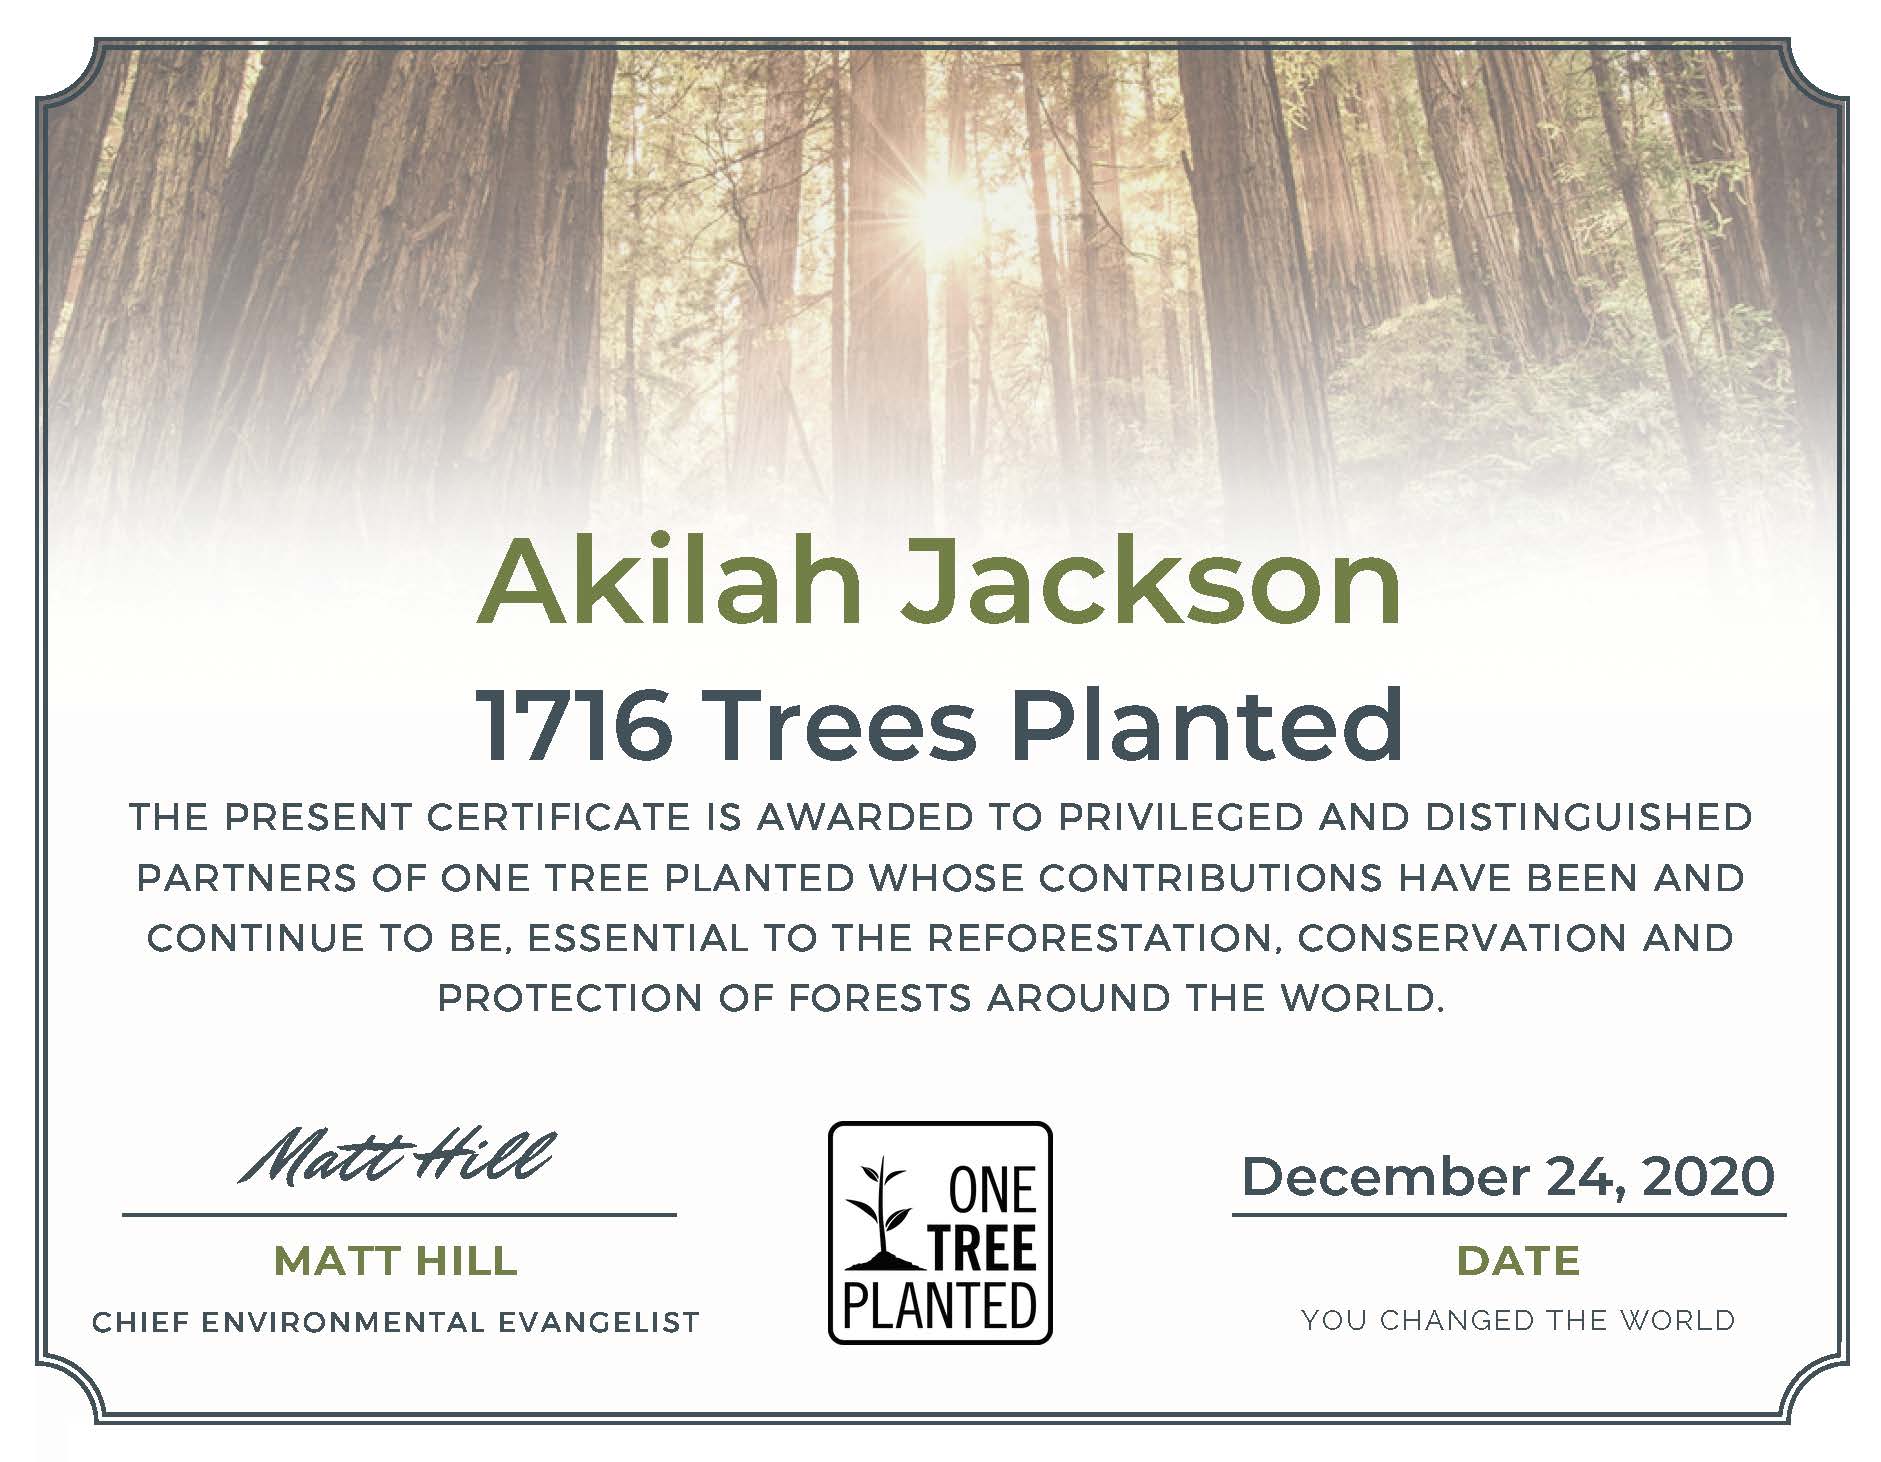 Just $1 plants 1 tree Campaign One Tree Planted